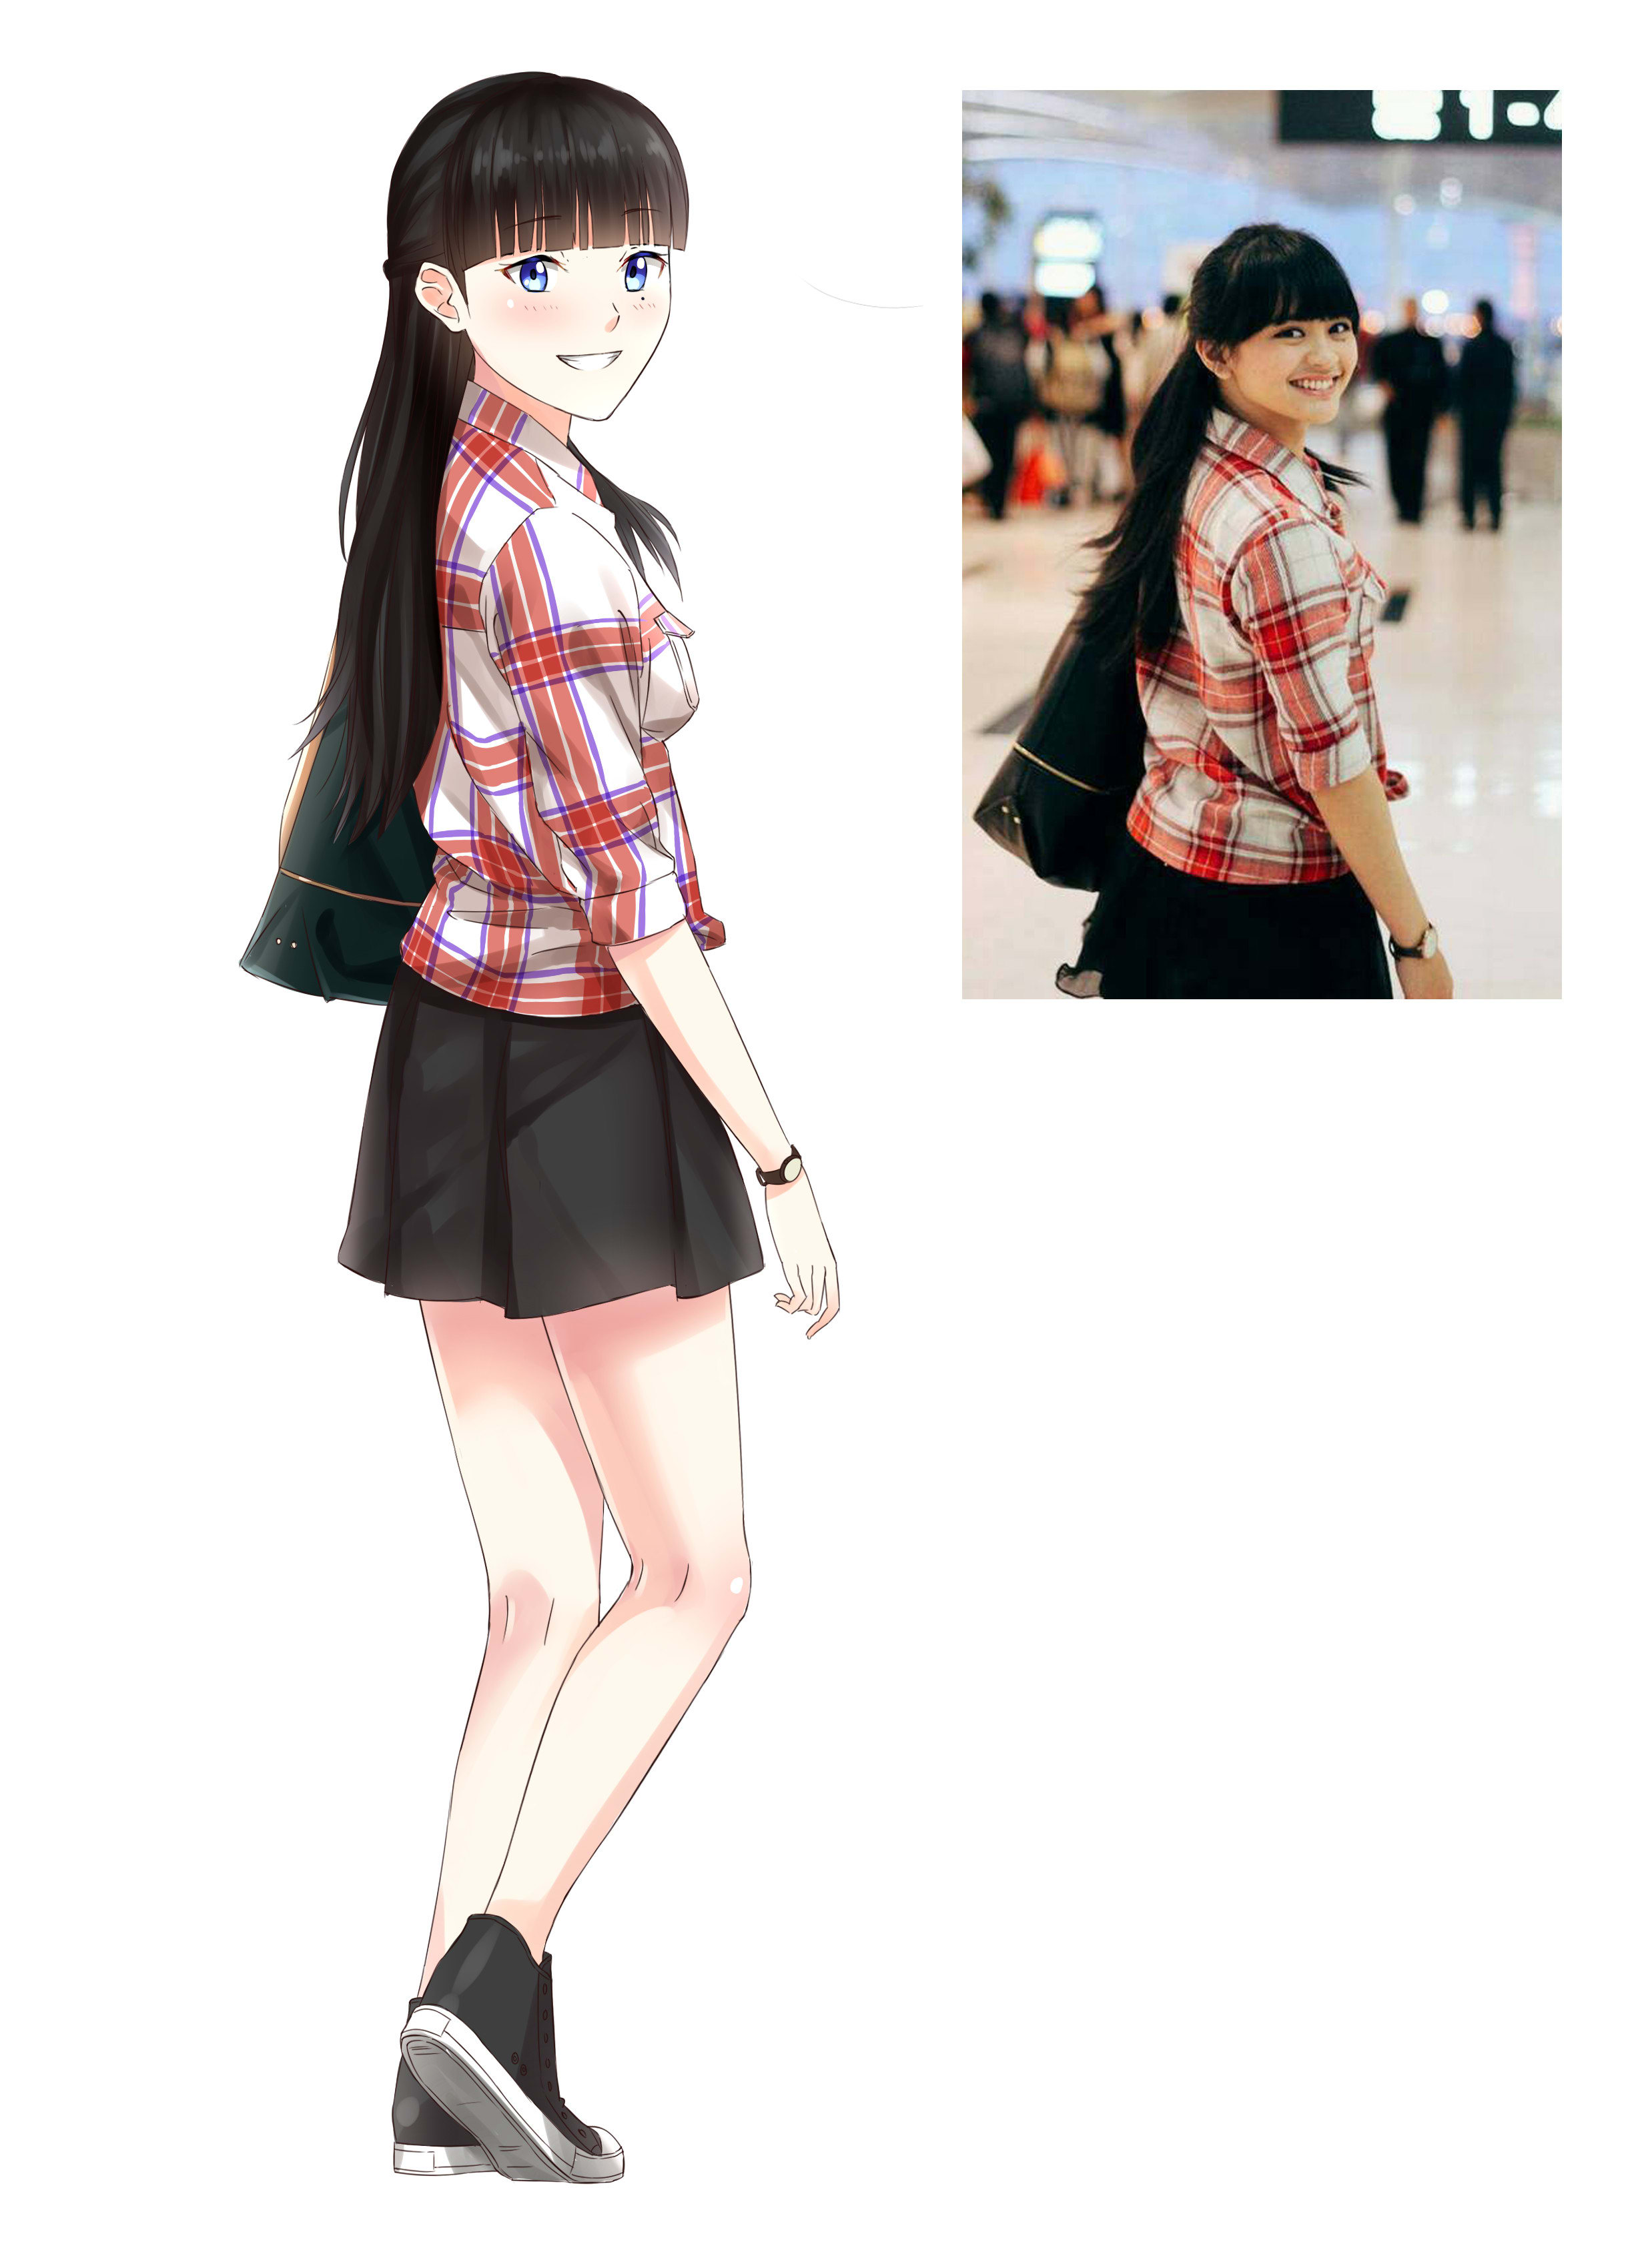 How to turn your picture into an anime drawing, & the 6 best apps to do so